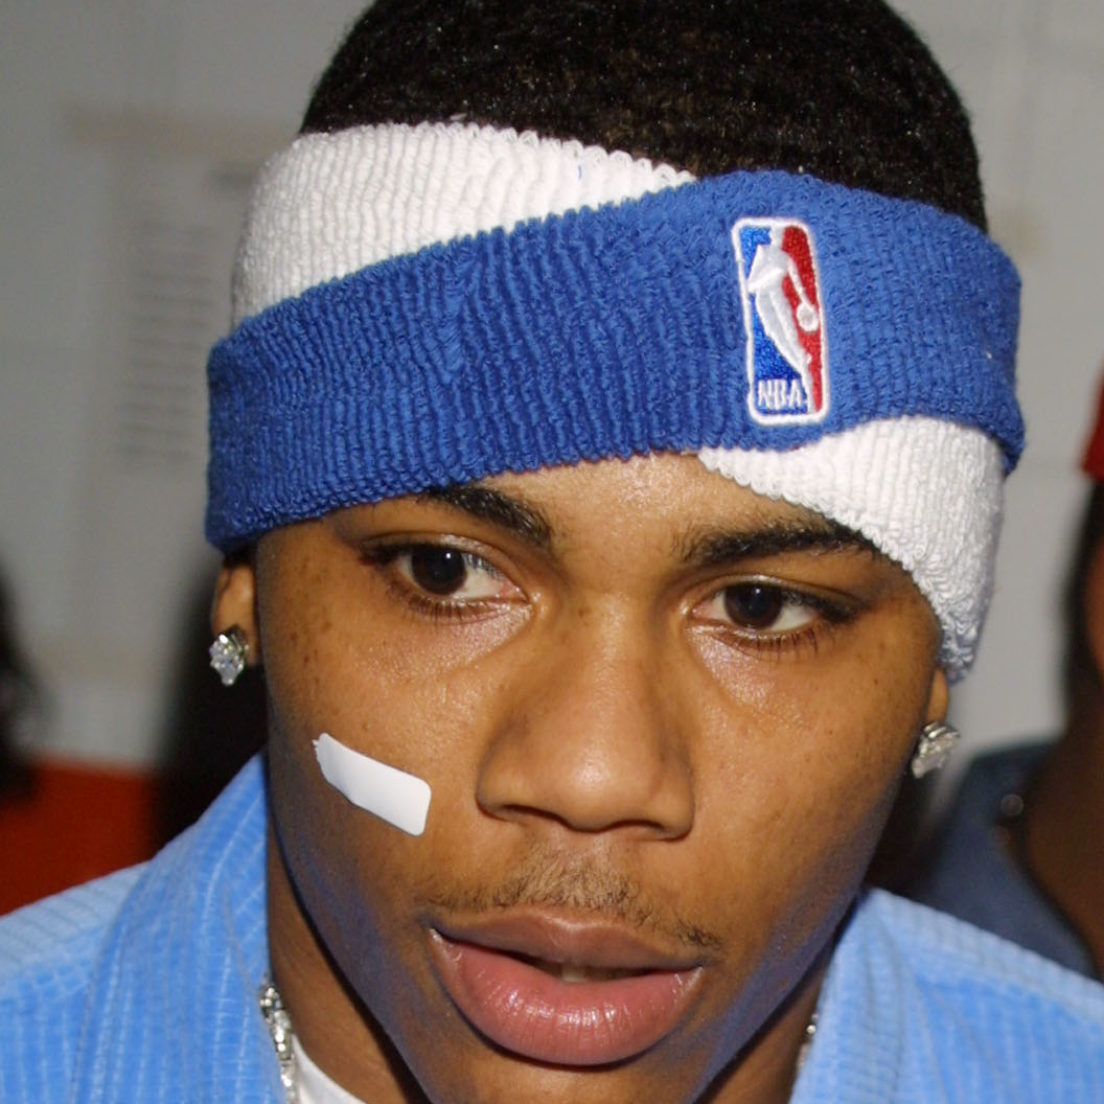 Nelly band aid